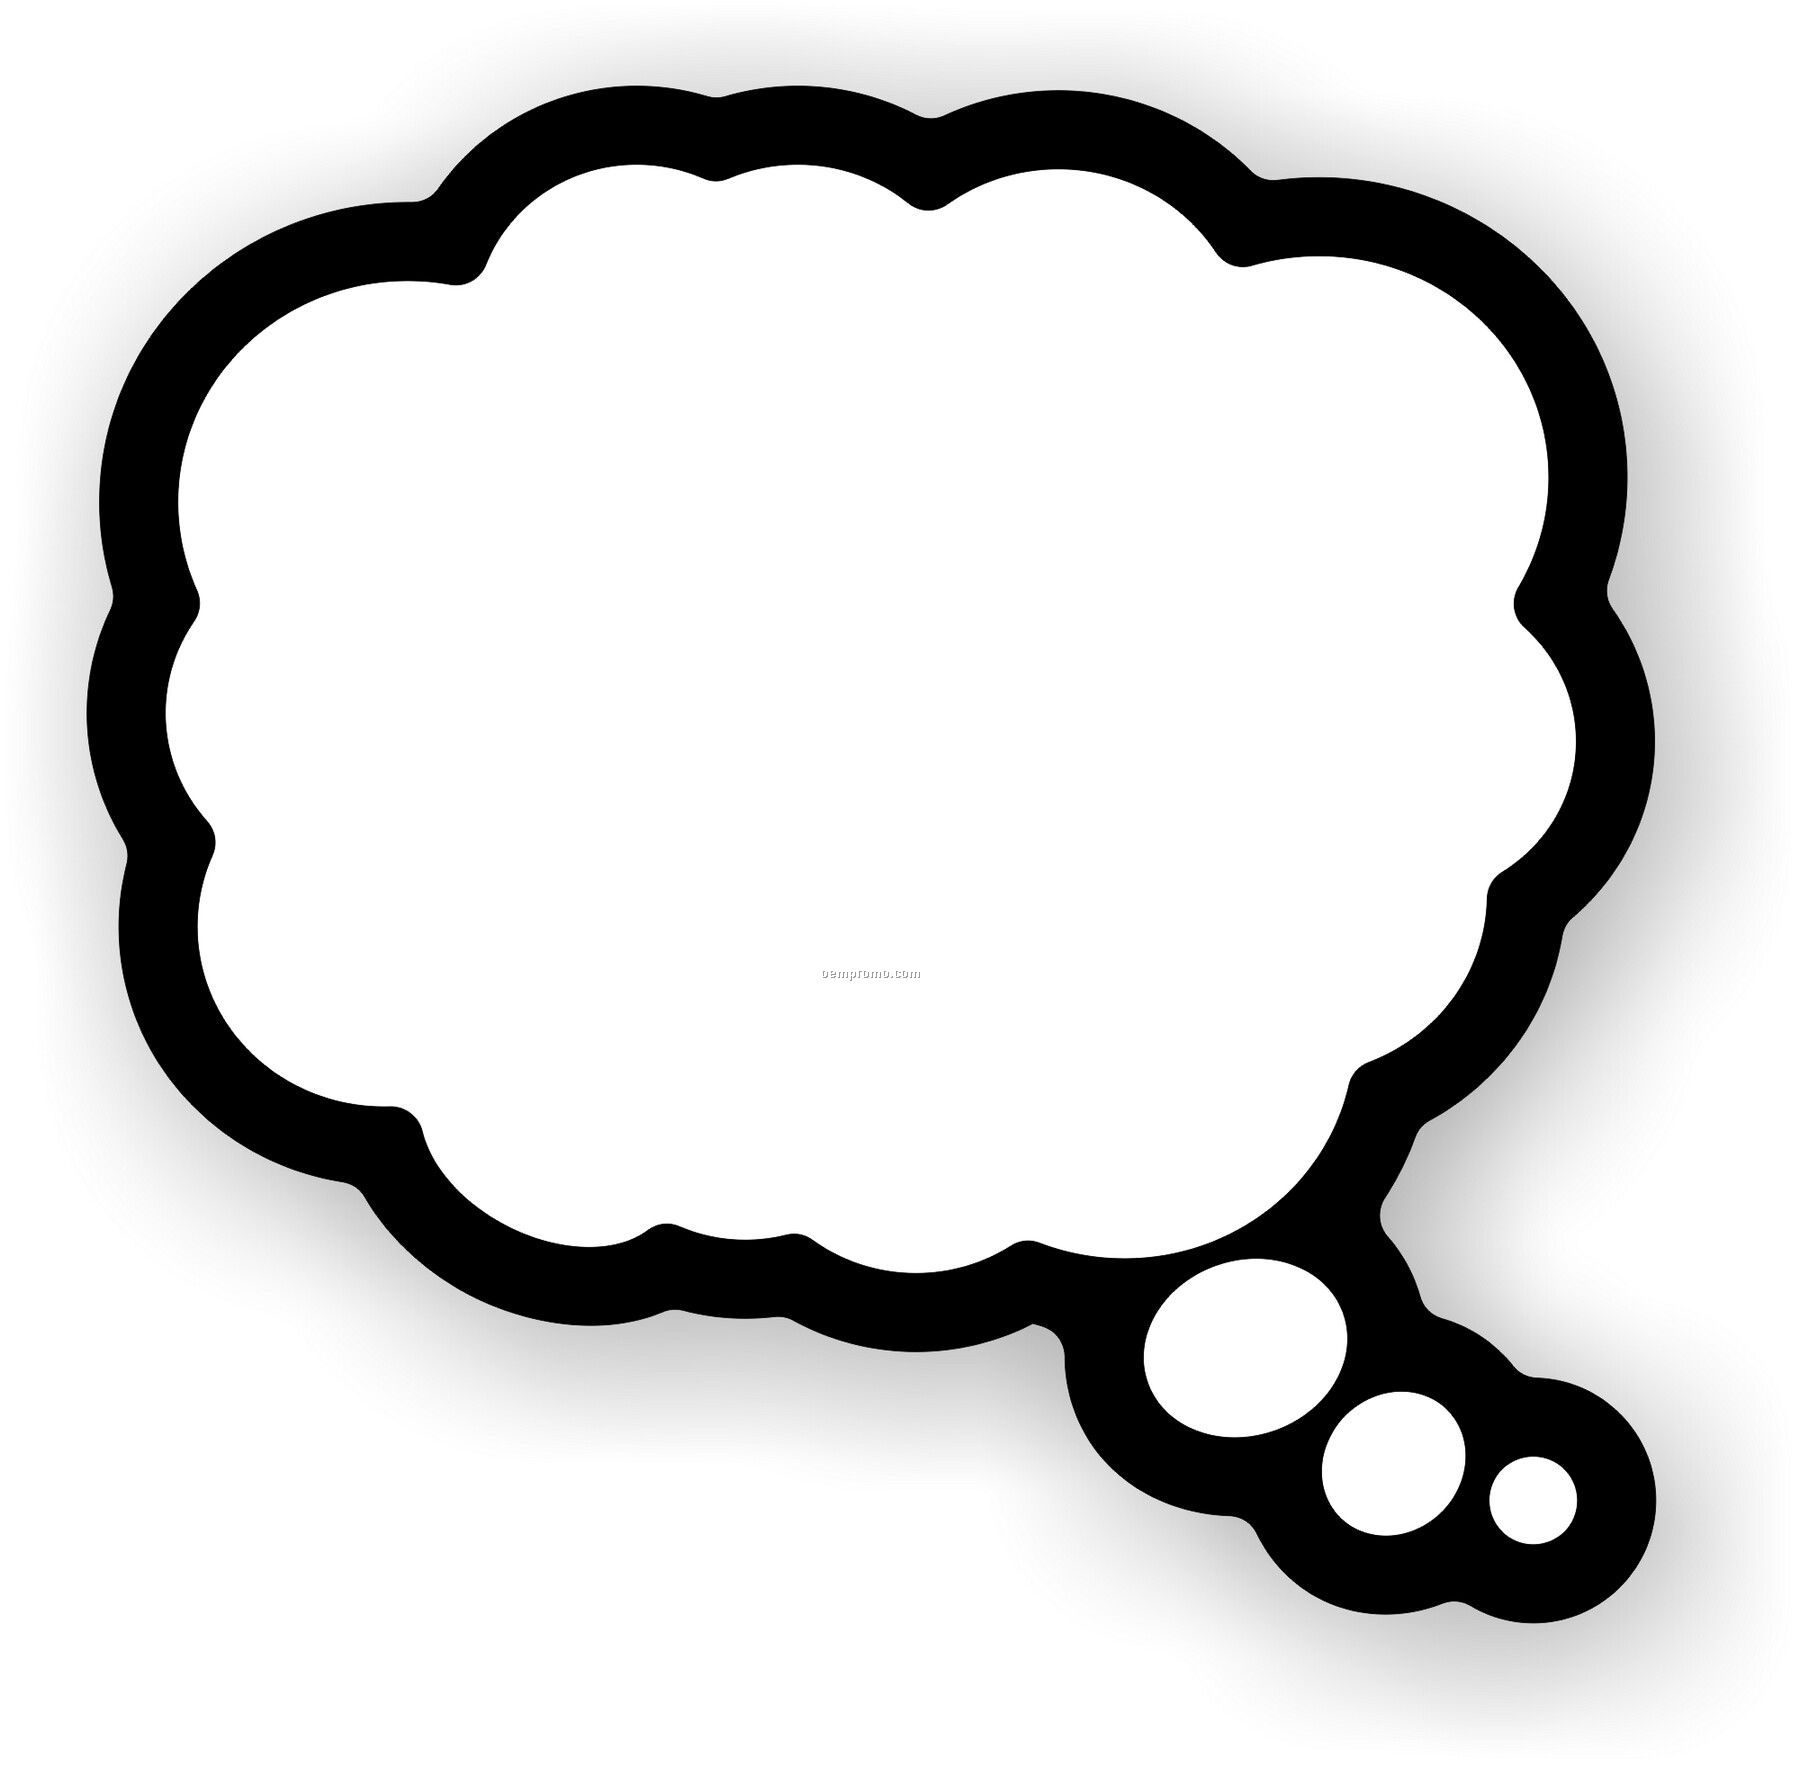 Thought bubble clipart free